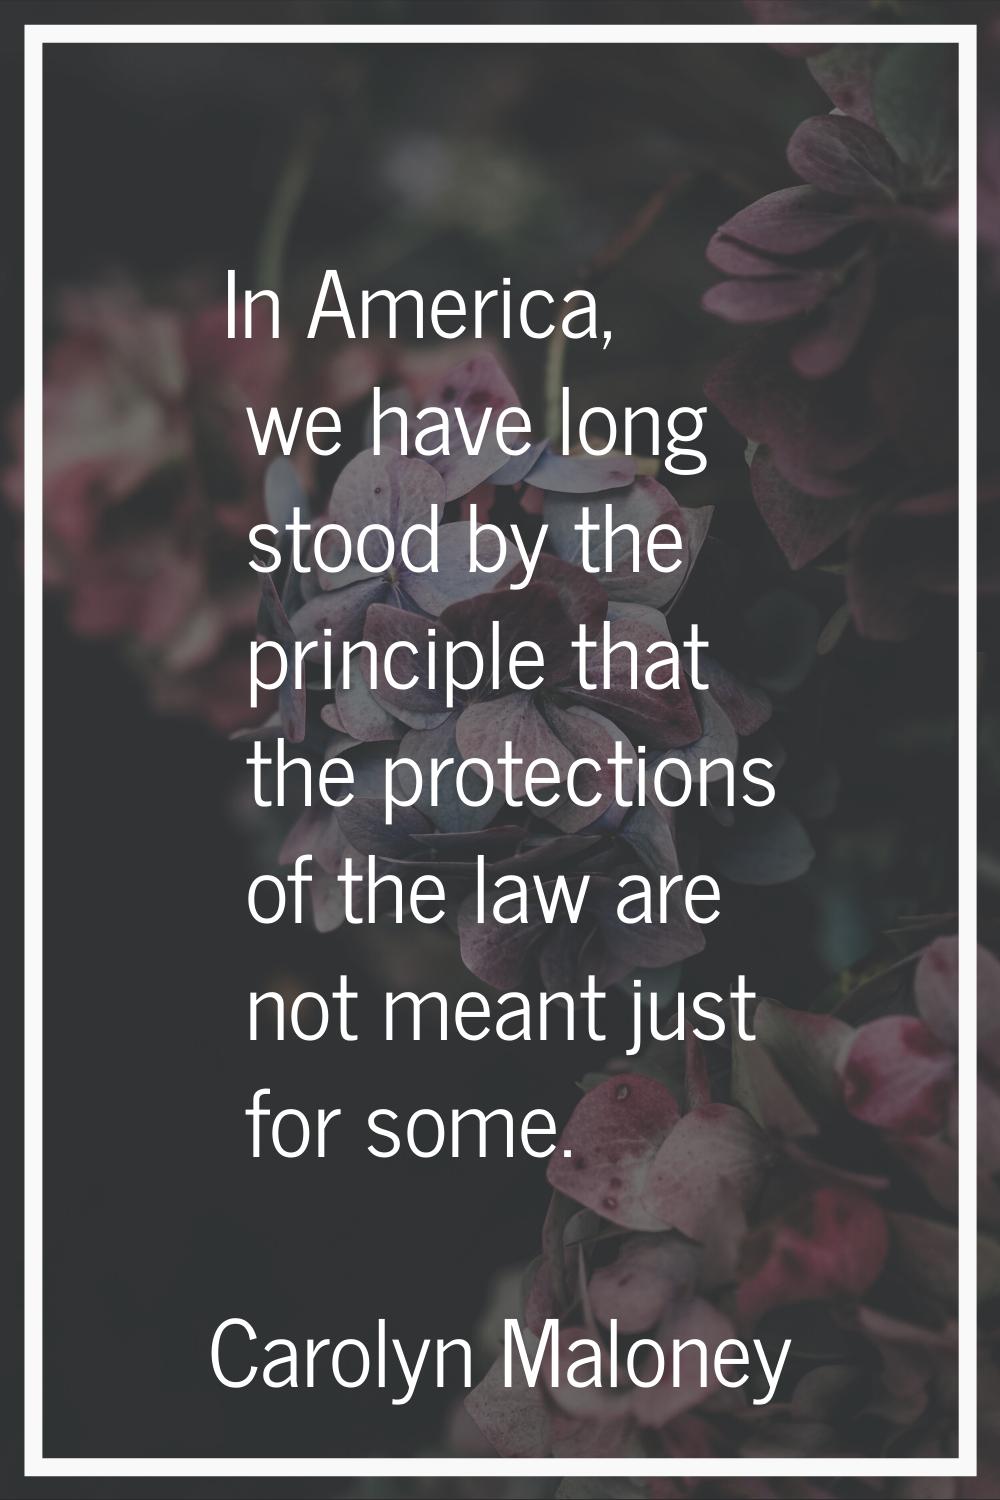 In America, we have long stood by the principle that the protections of the law are not meant just 